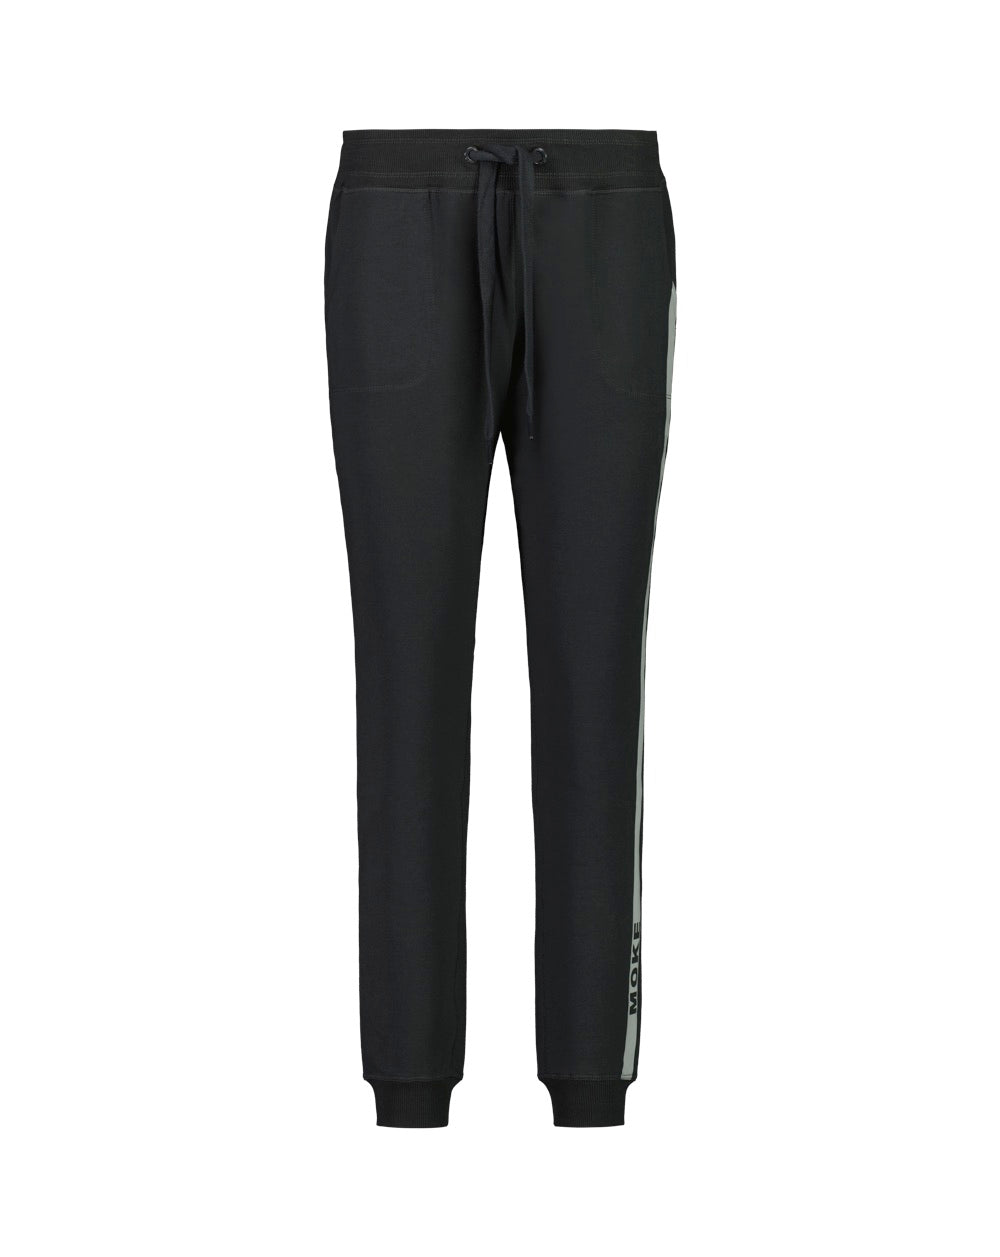 Livy Women&#39;s Trackpants with reflective Stripe - Charcoal